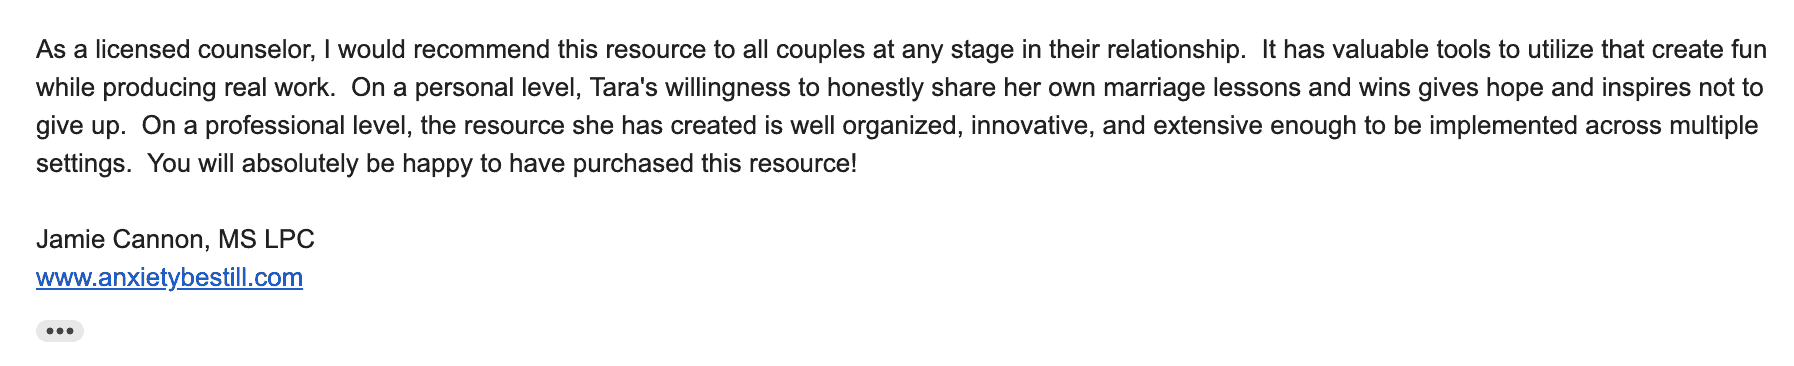 A testimonial about The Health Marriage Solution